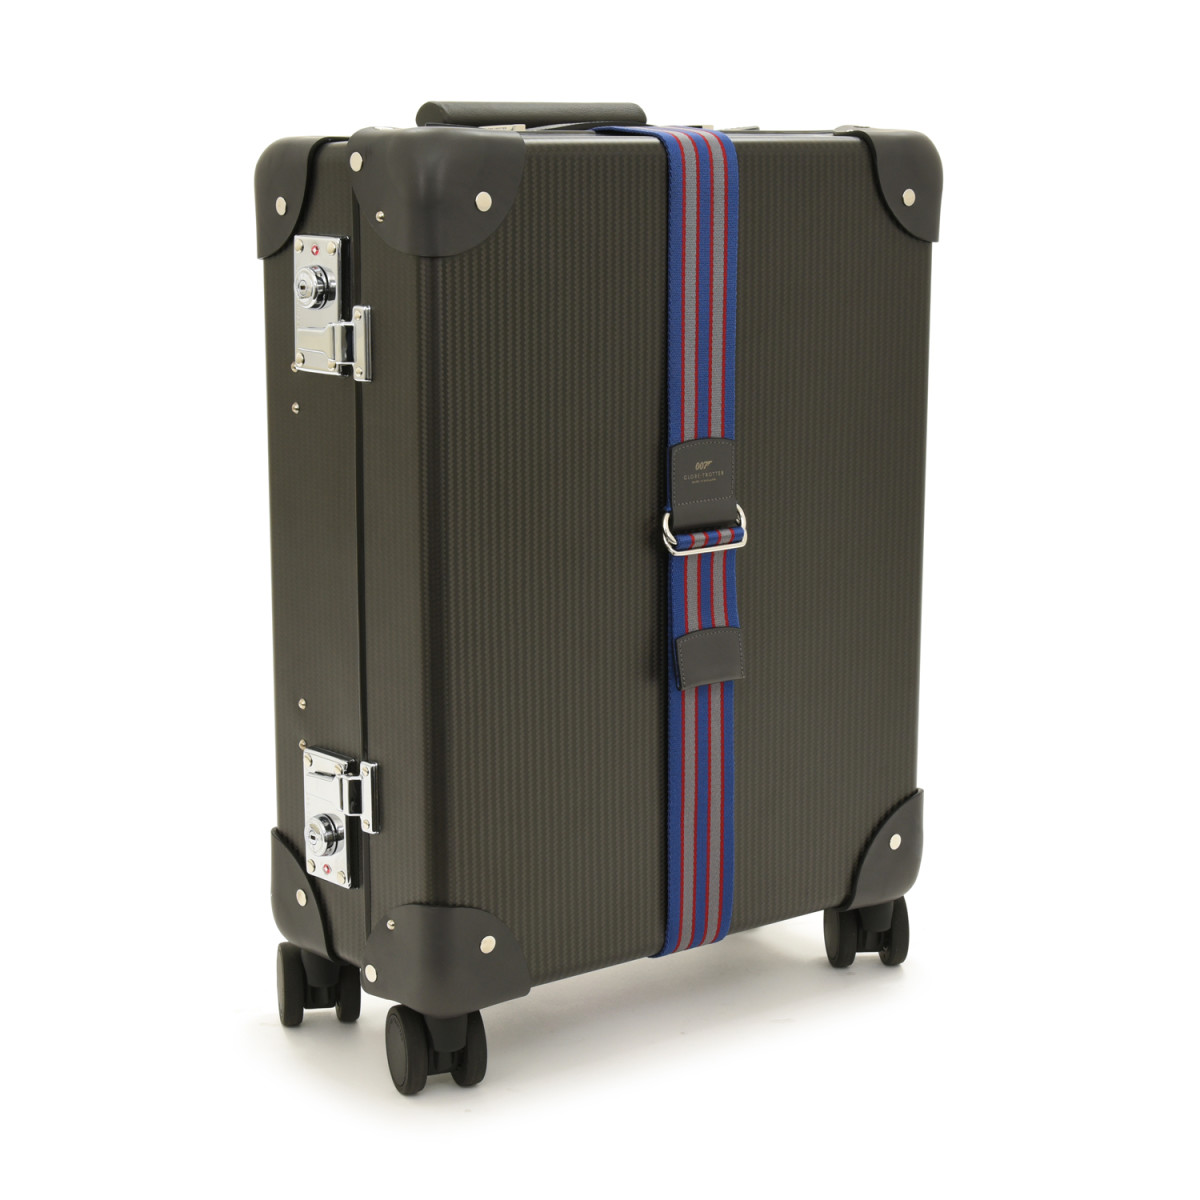 Globe-Trotter releases its 007-grade No Time To Die Luggage Collection